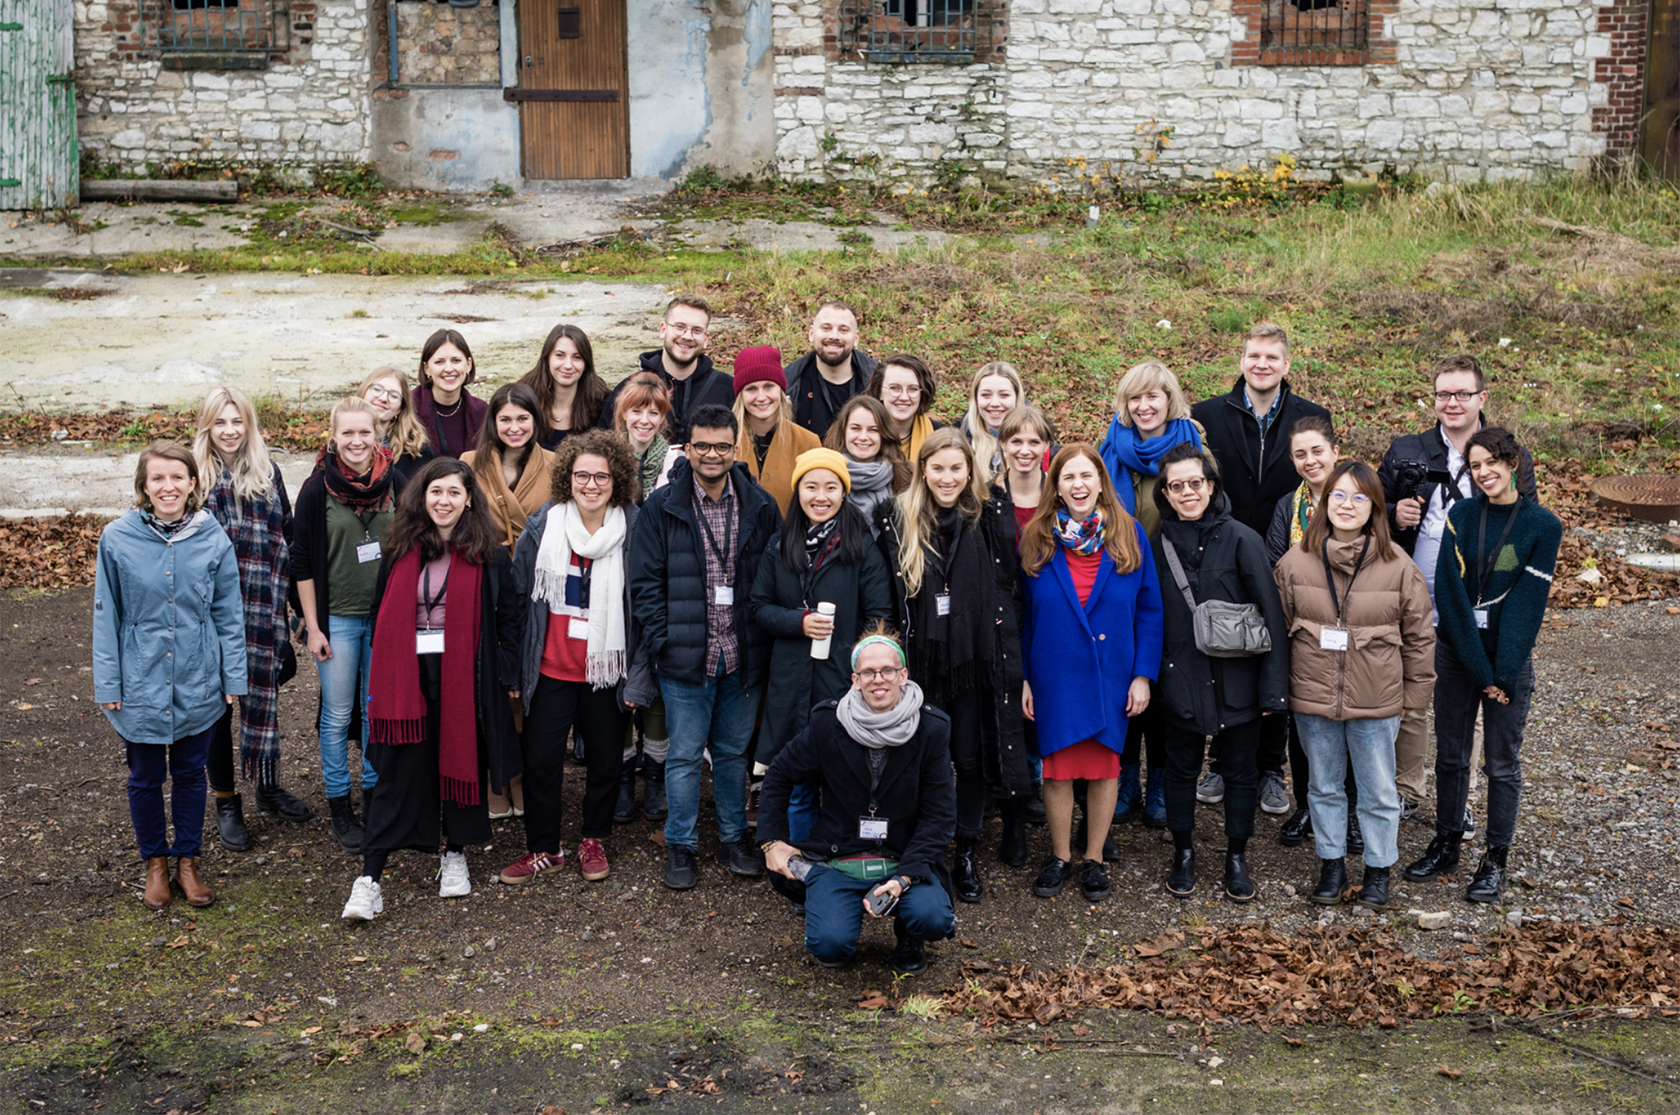 Group photo of students and academics in front of an old building